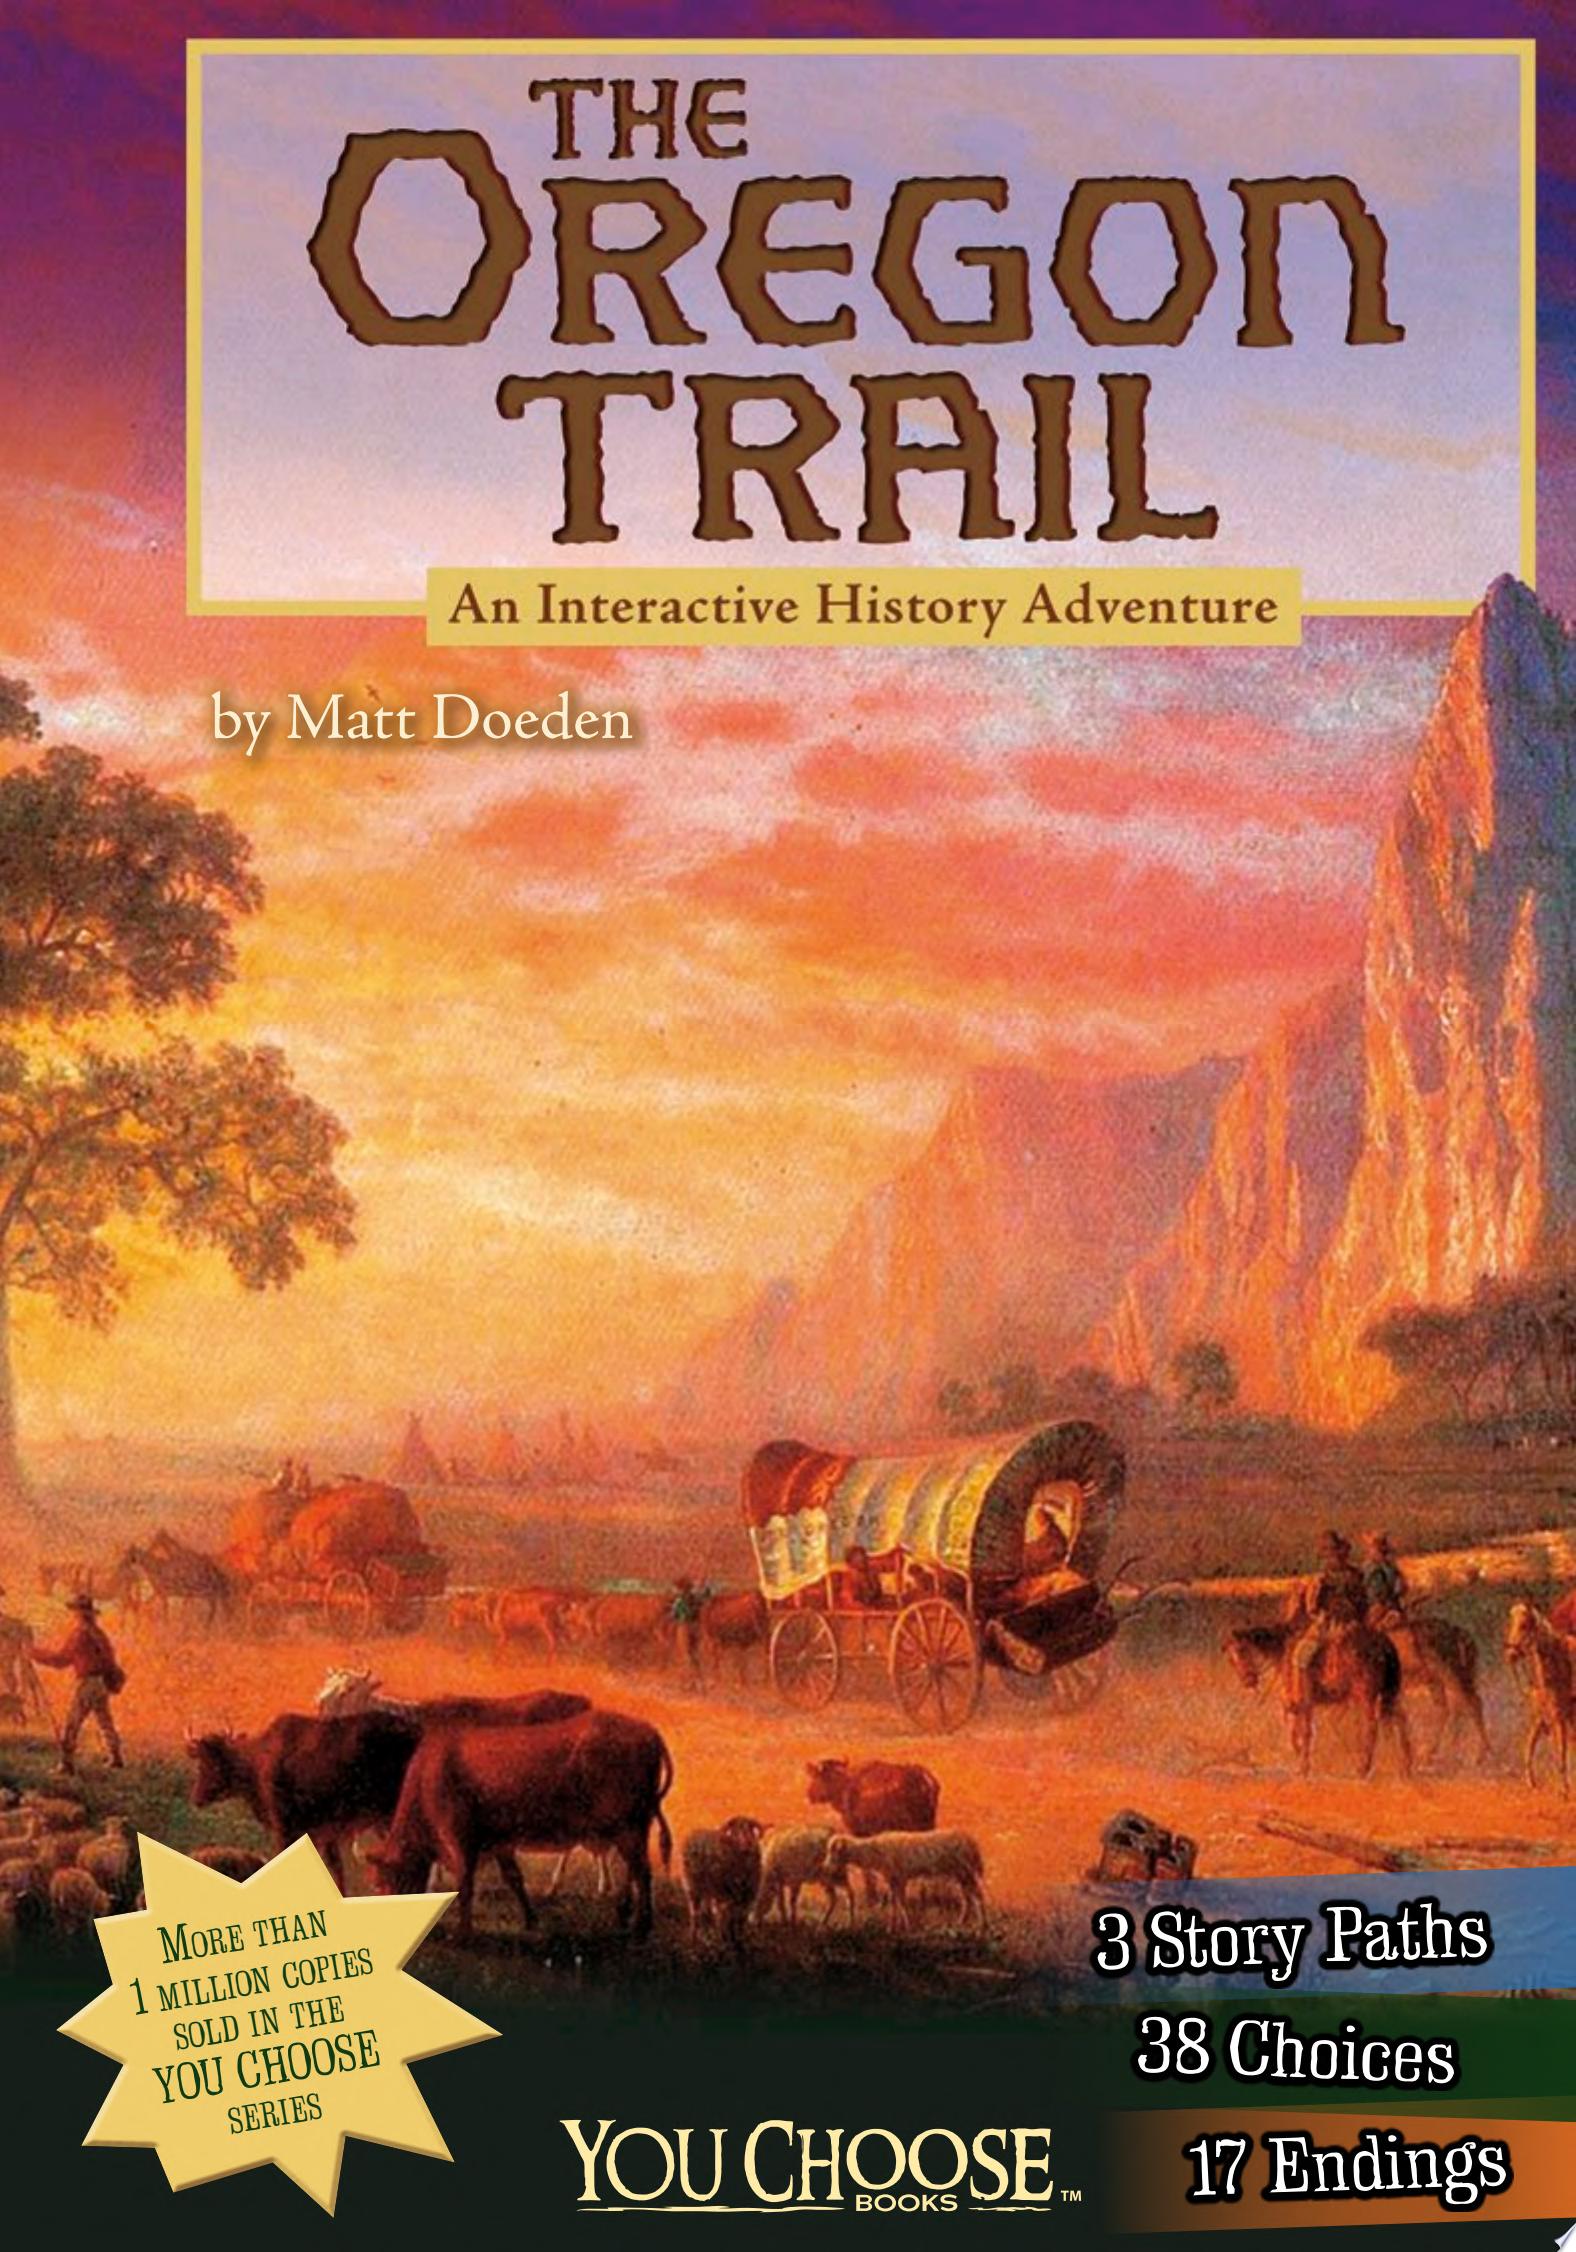 Image for "The Oregon Trail"